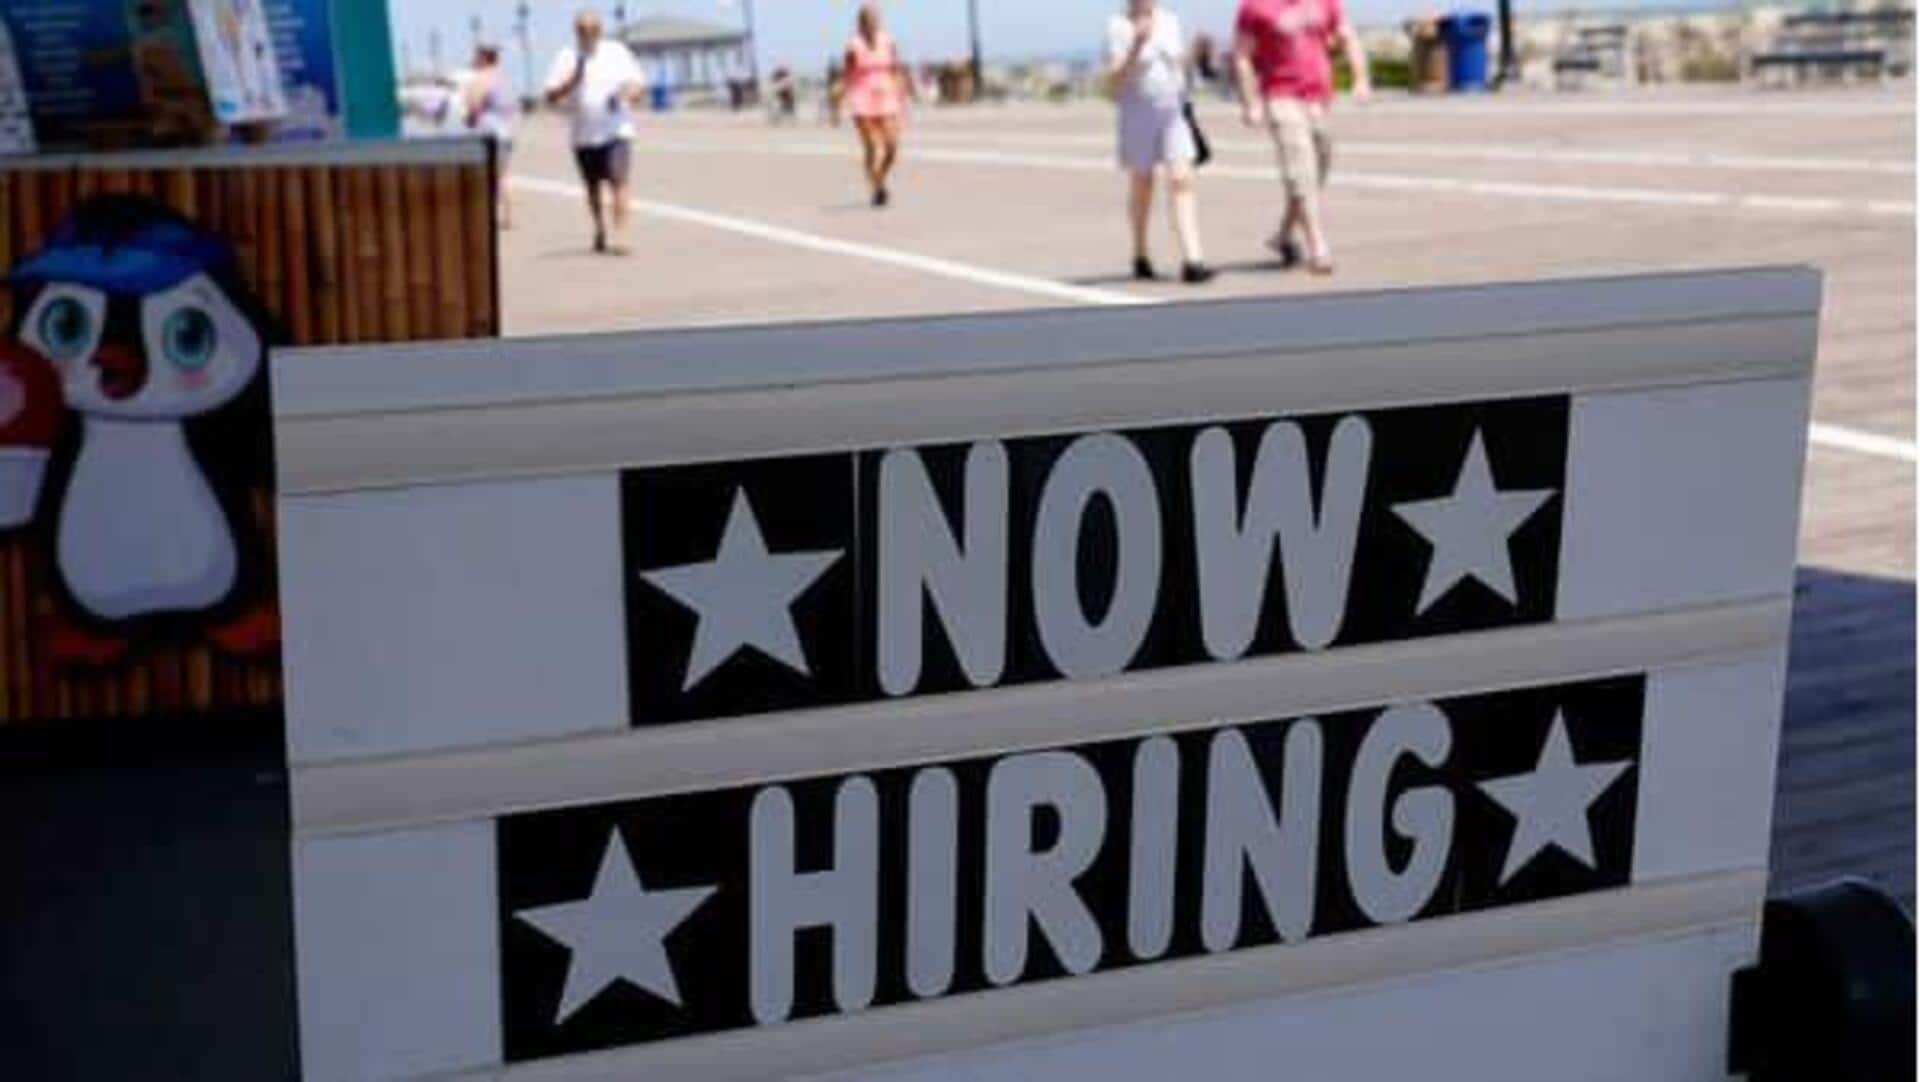 Tourism industry rebounds with hiring demand spike in August